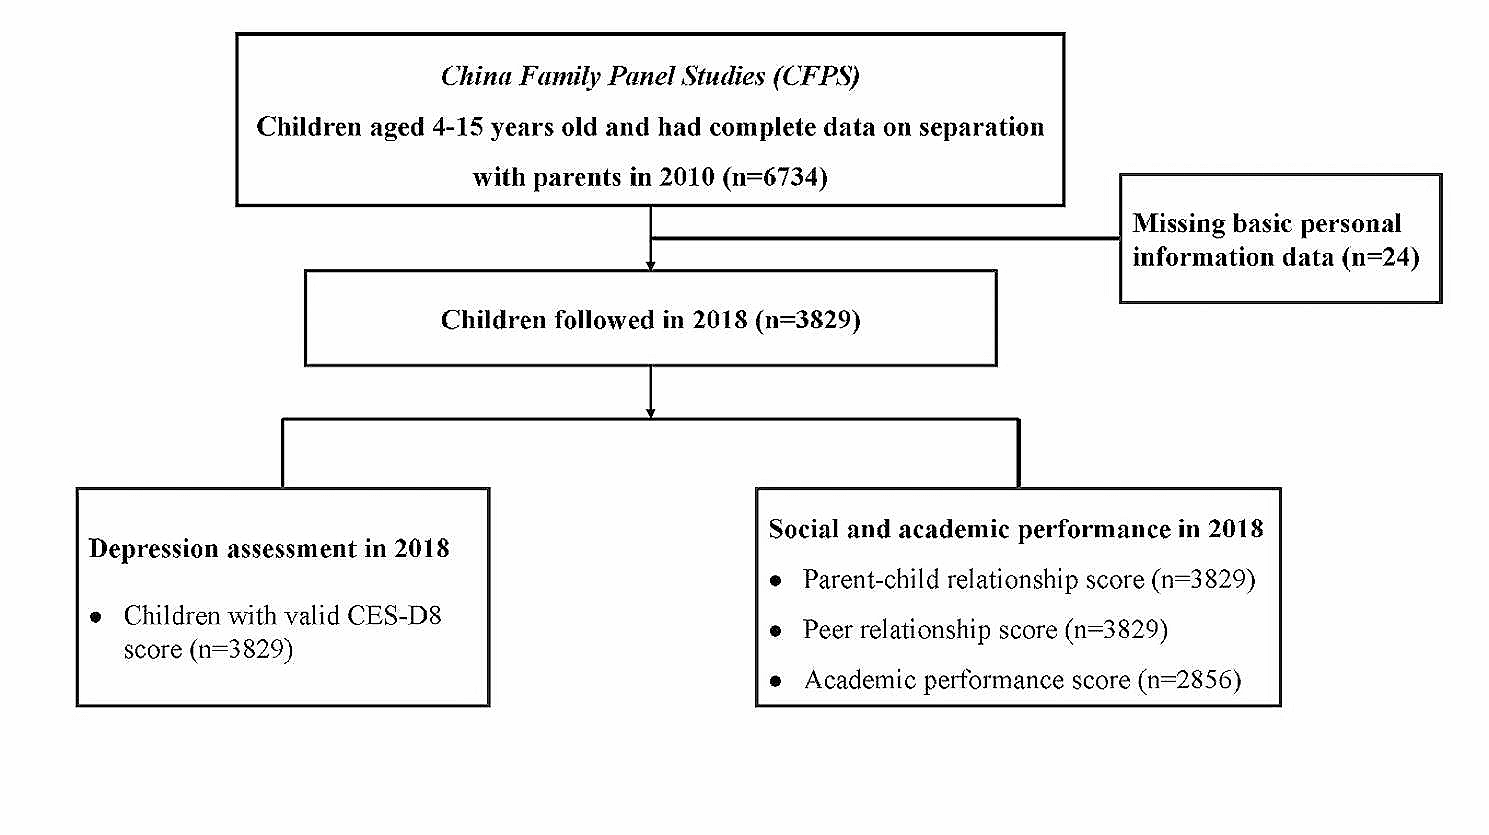 Association of early parent–child separation with depression, social and academic performance in adolescence and early adulthood: a prospective cohort study